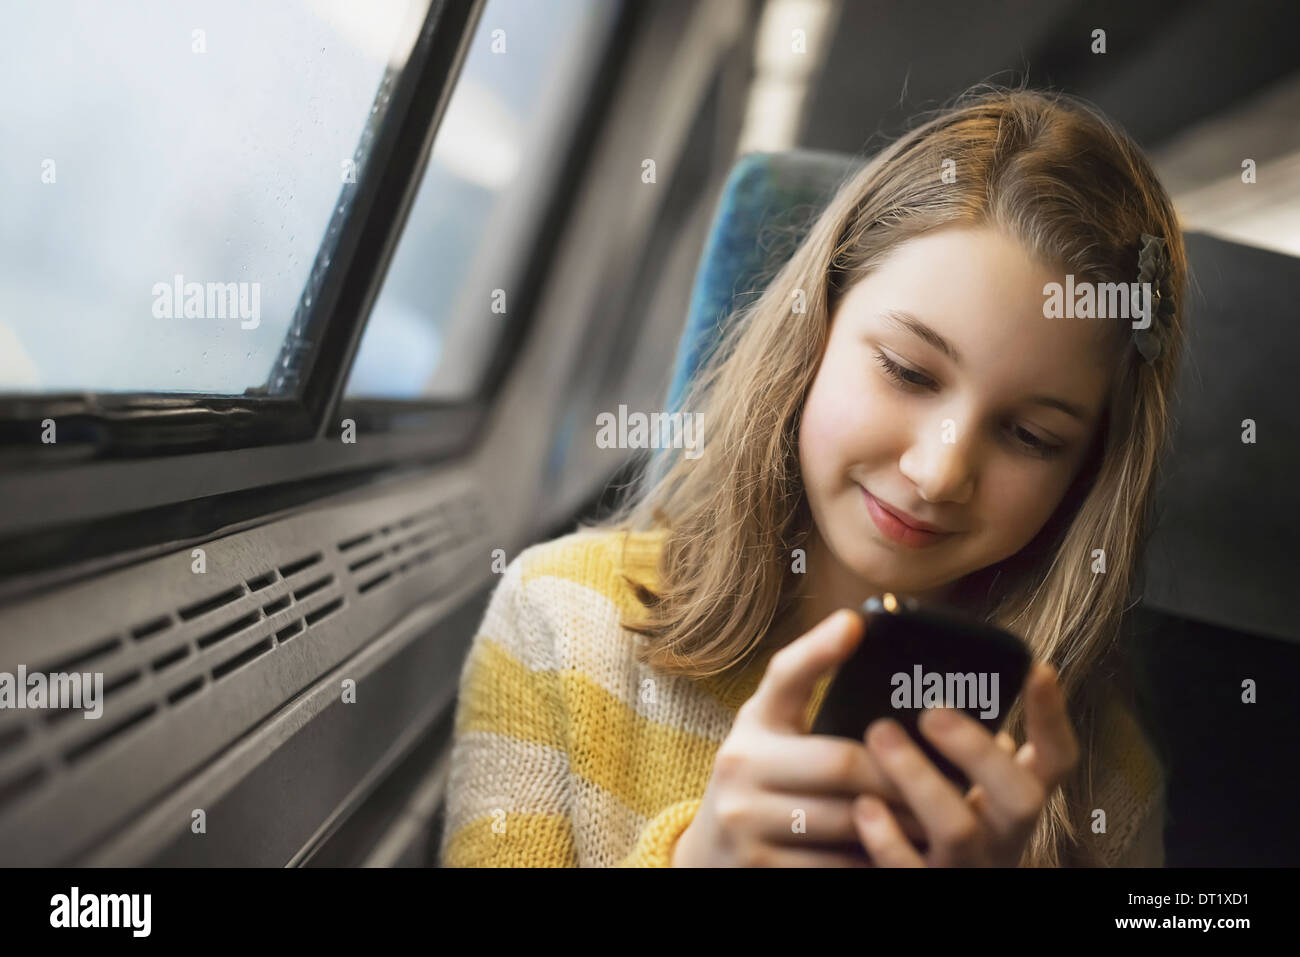 A young girl with long blonde hair sitting by a window on a train using her mobile phone texting and sending messages Stock Photo